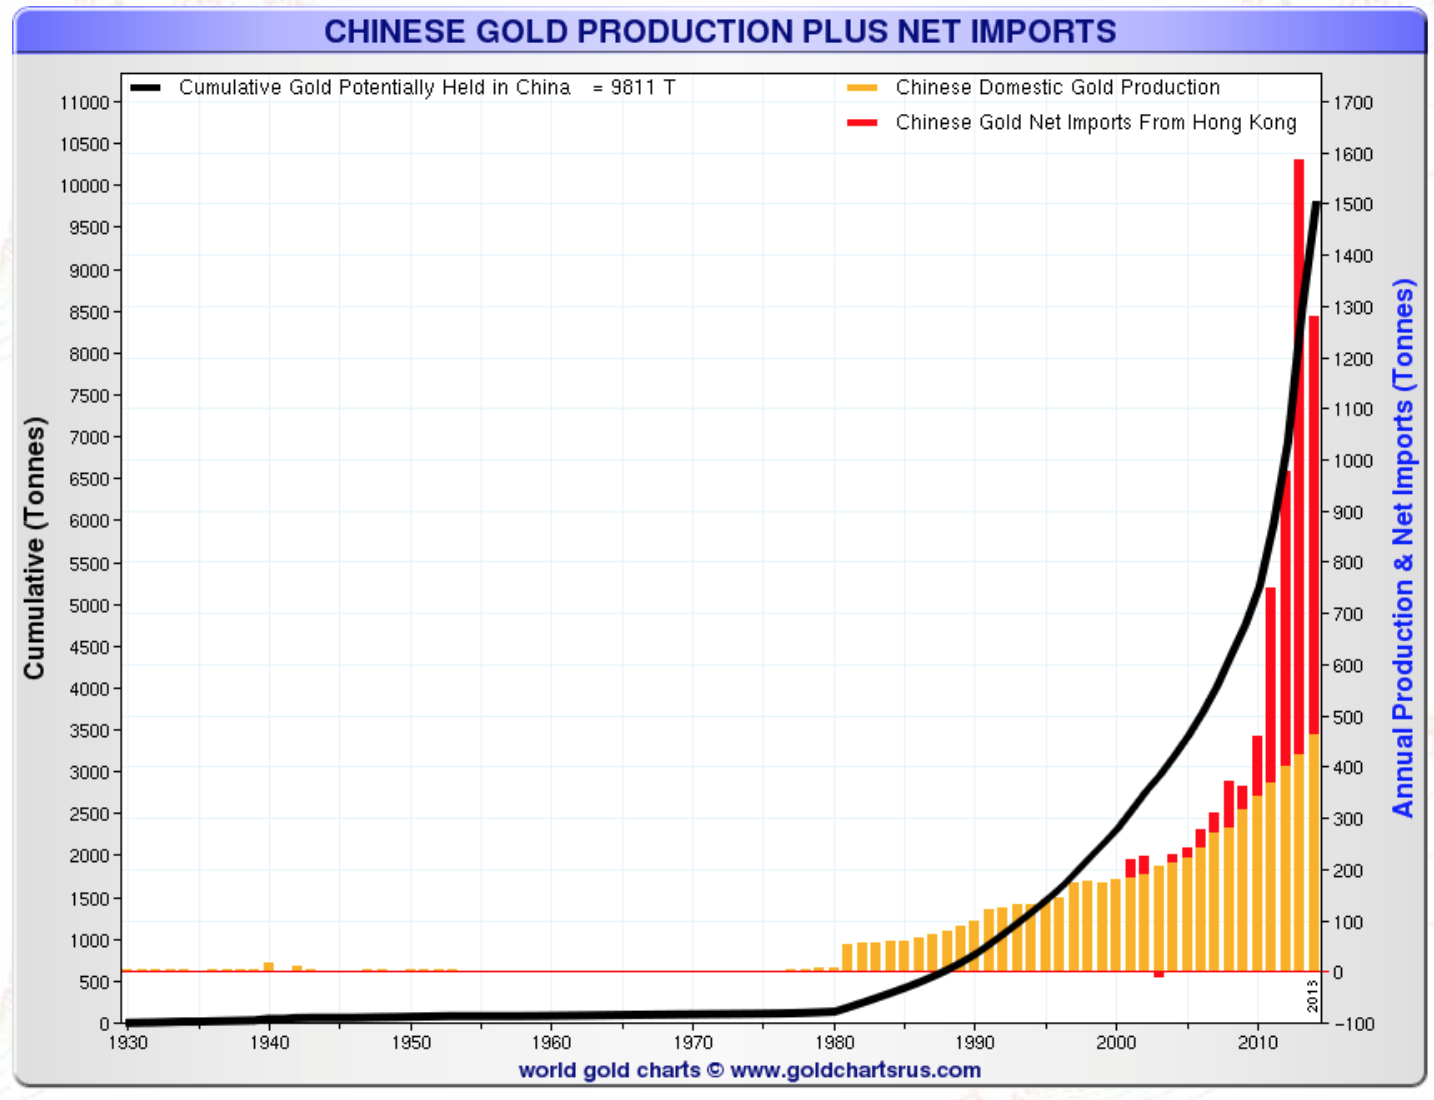 Production chinoise d'or plus importations nettes